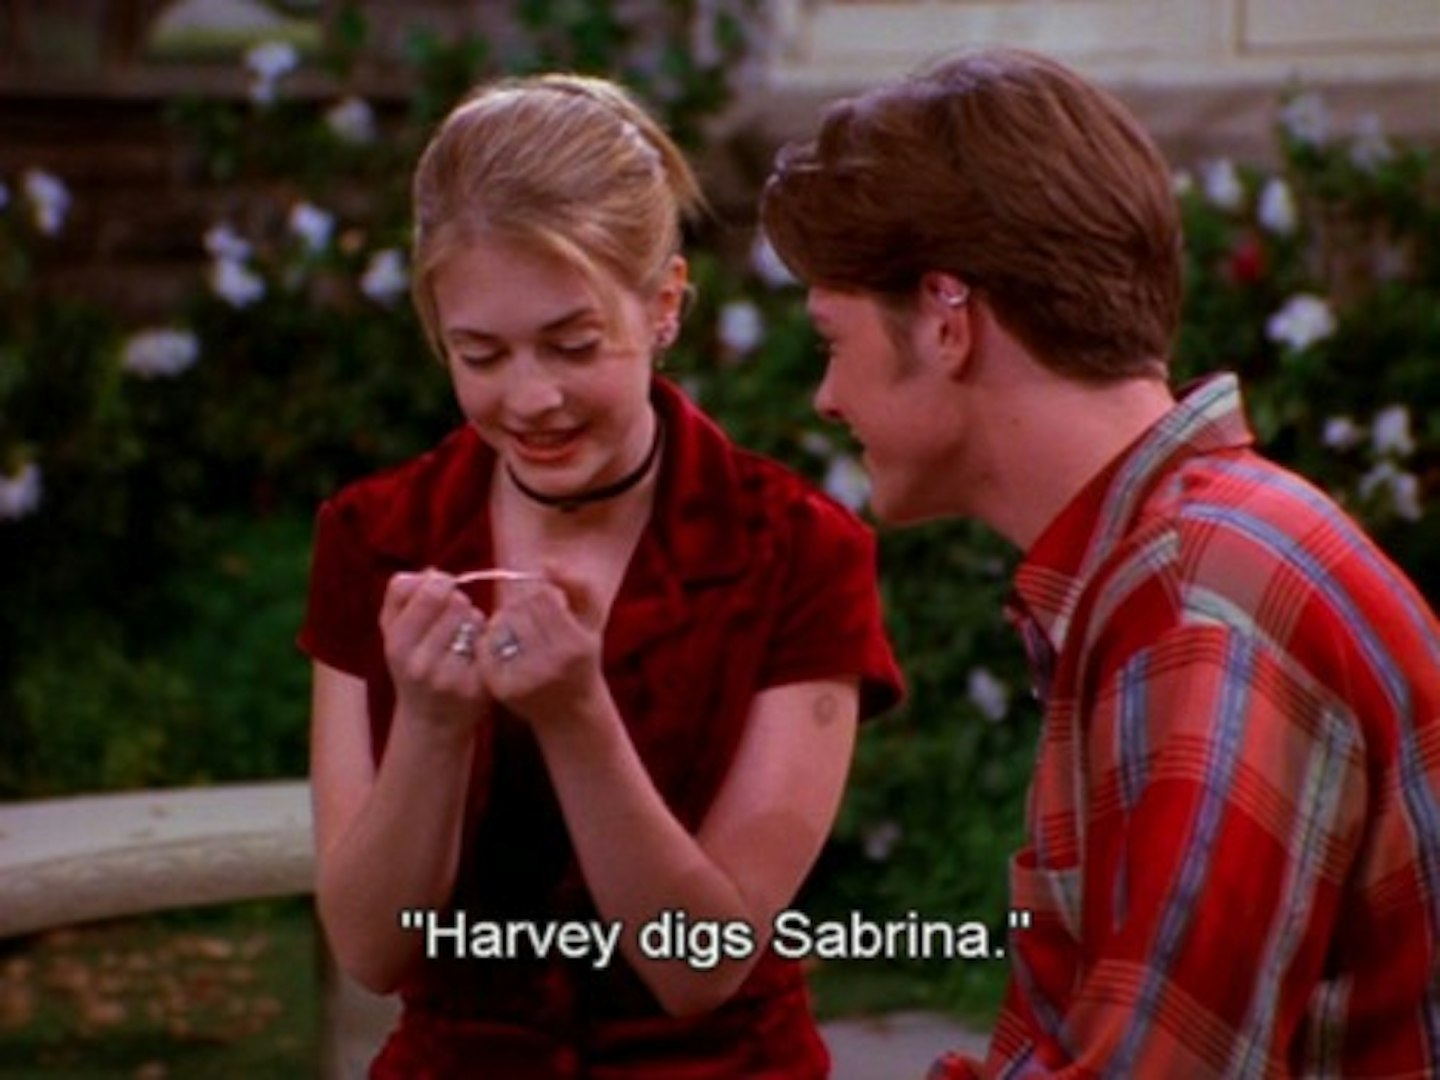 Sabrina the Teenage Witch life lessons